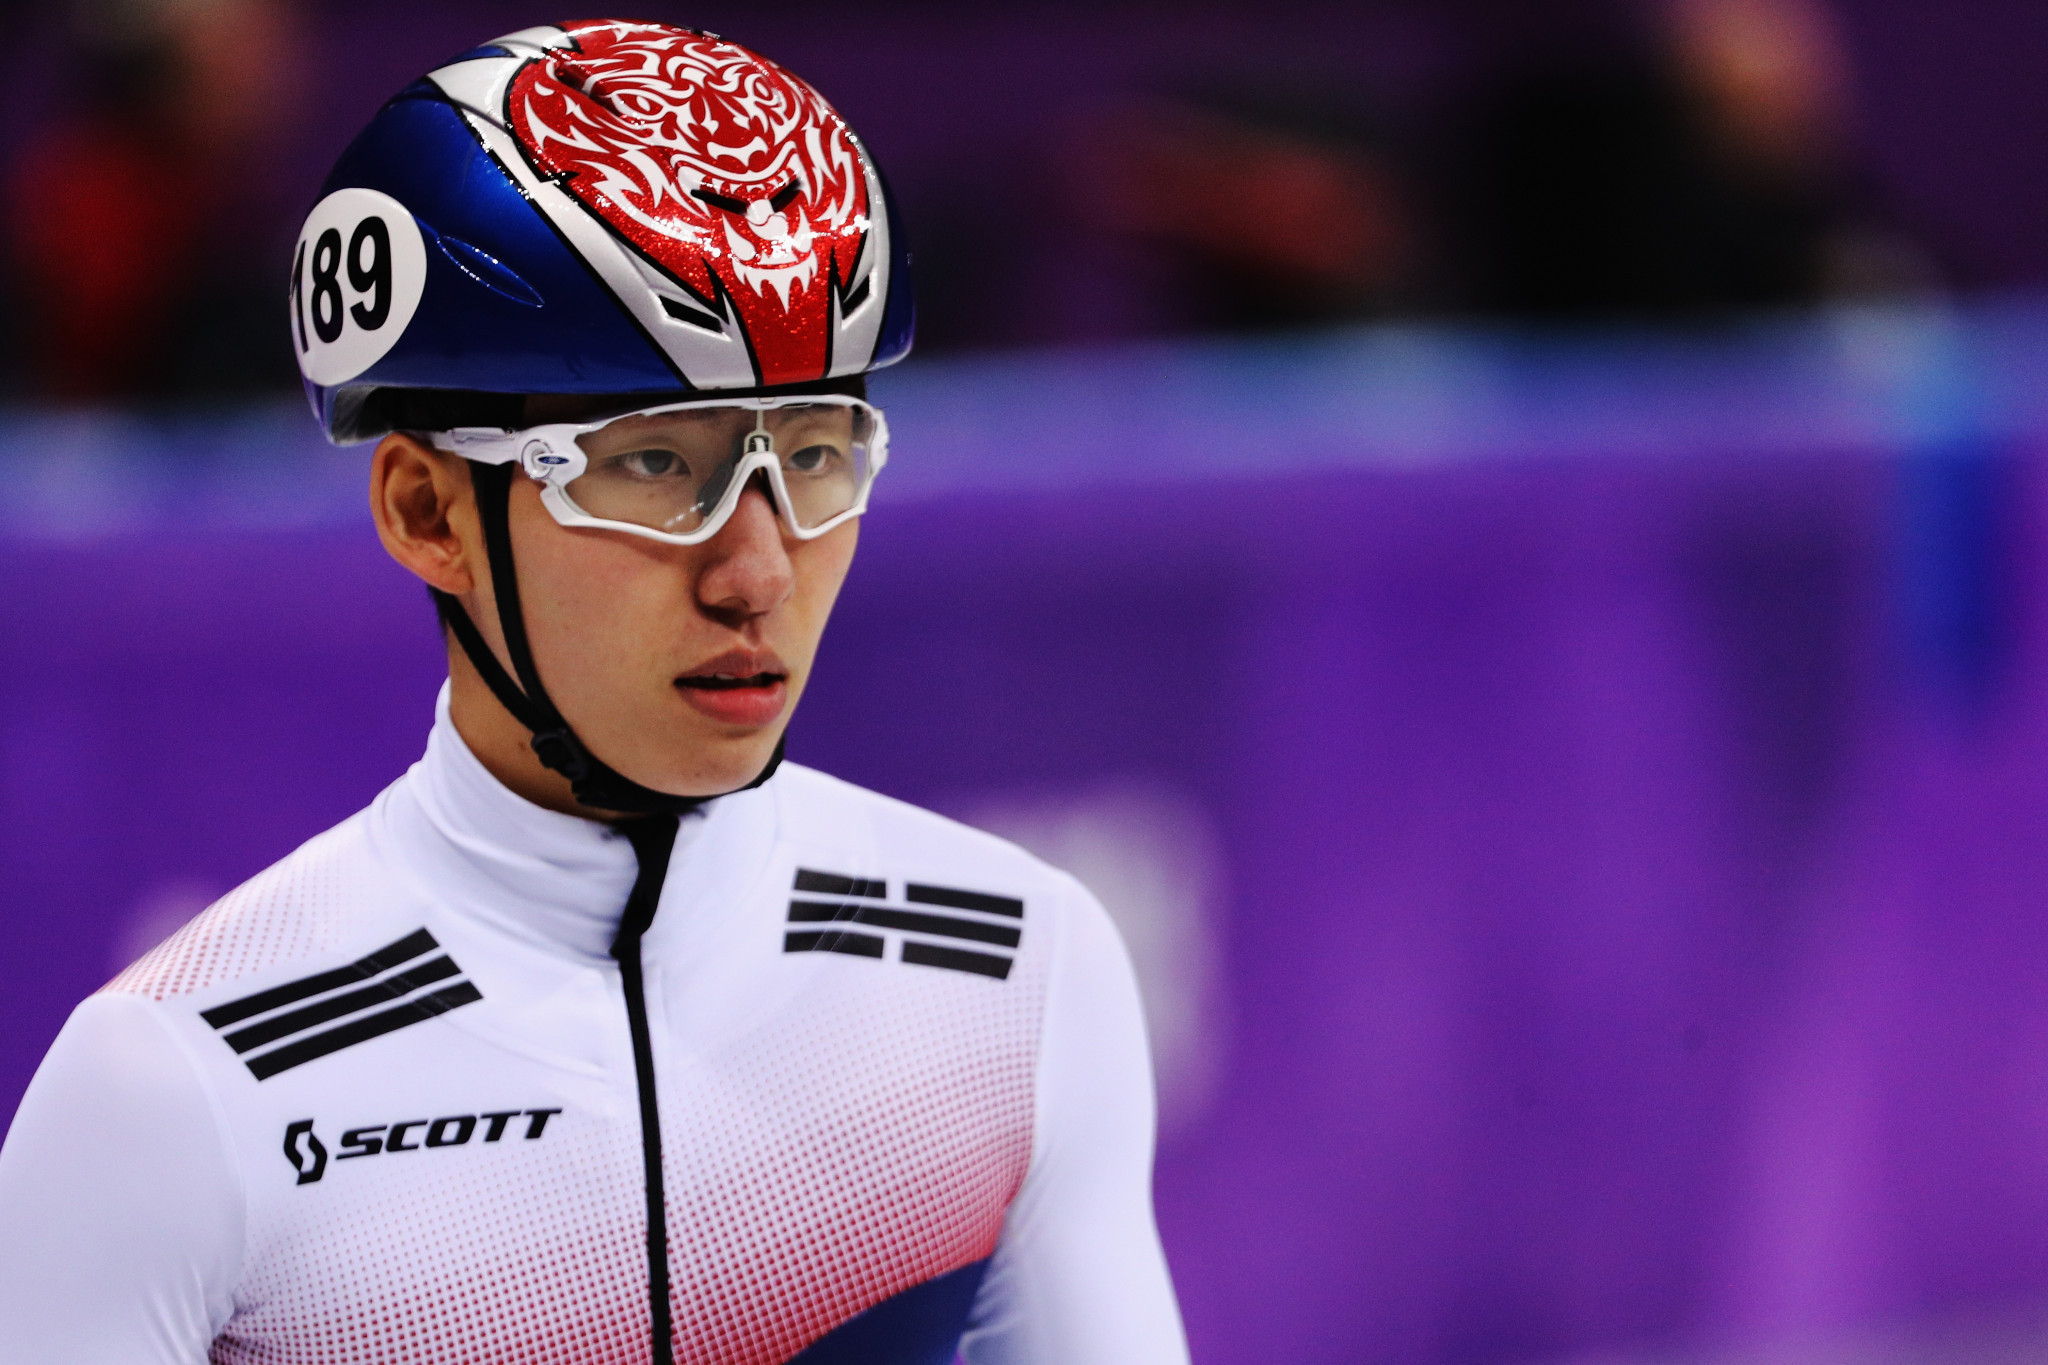 Lim Hyo-jun is expected to switch nationality to represent China ©Getty Images